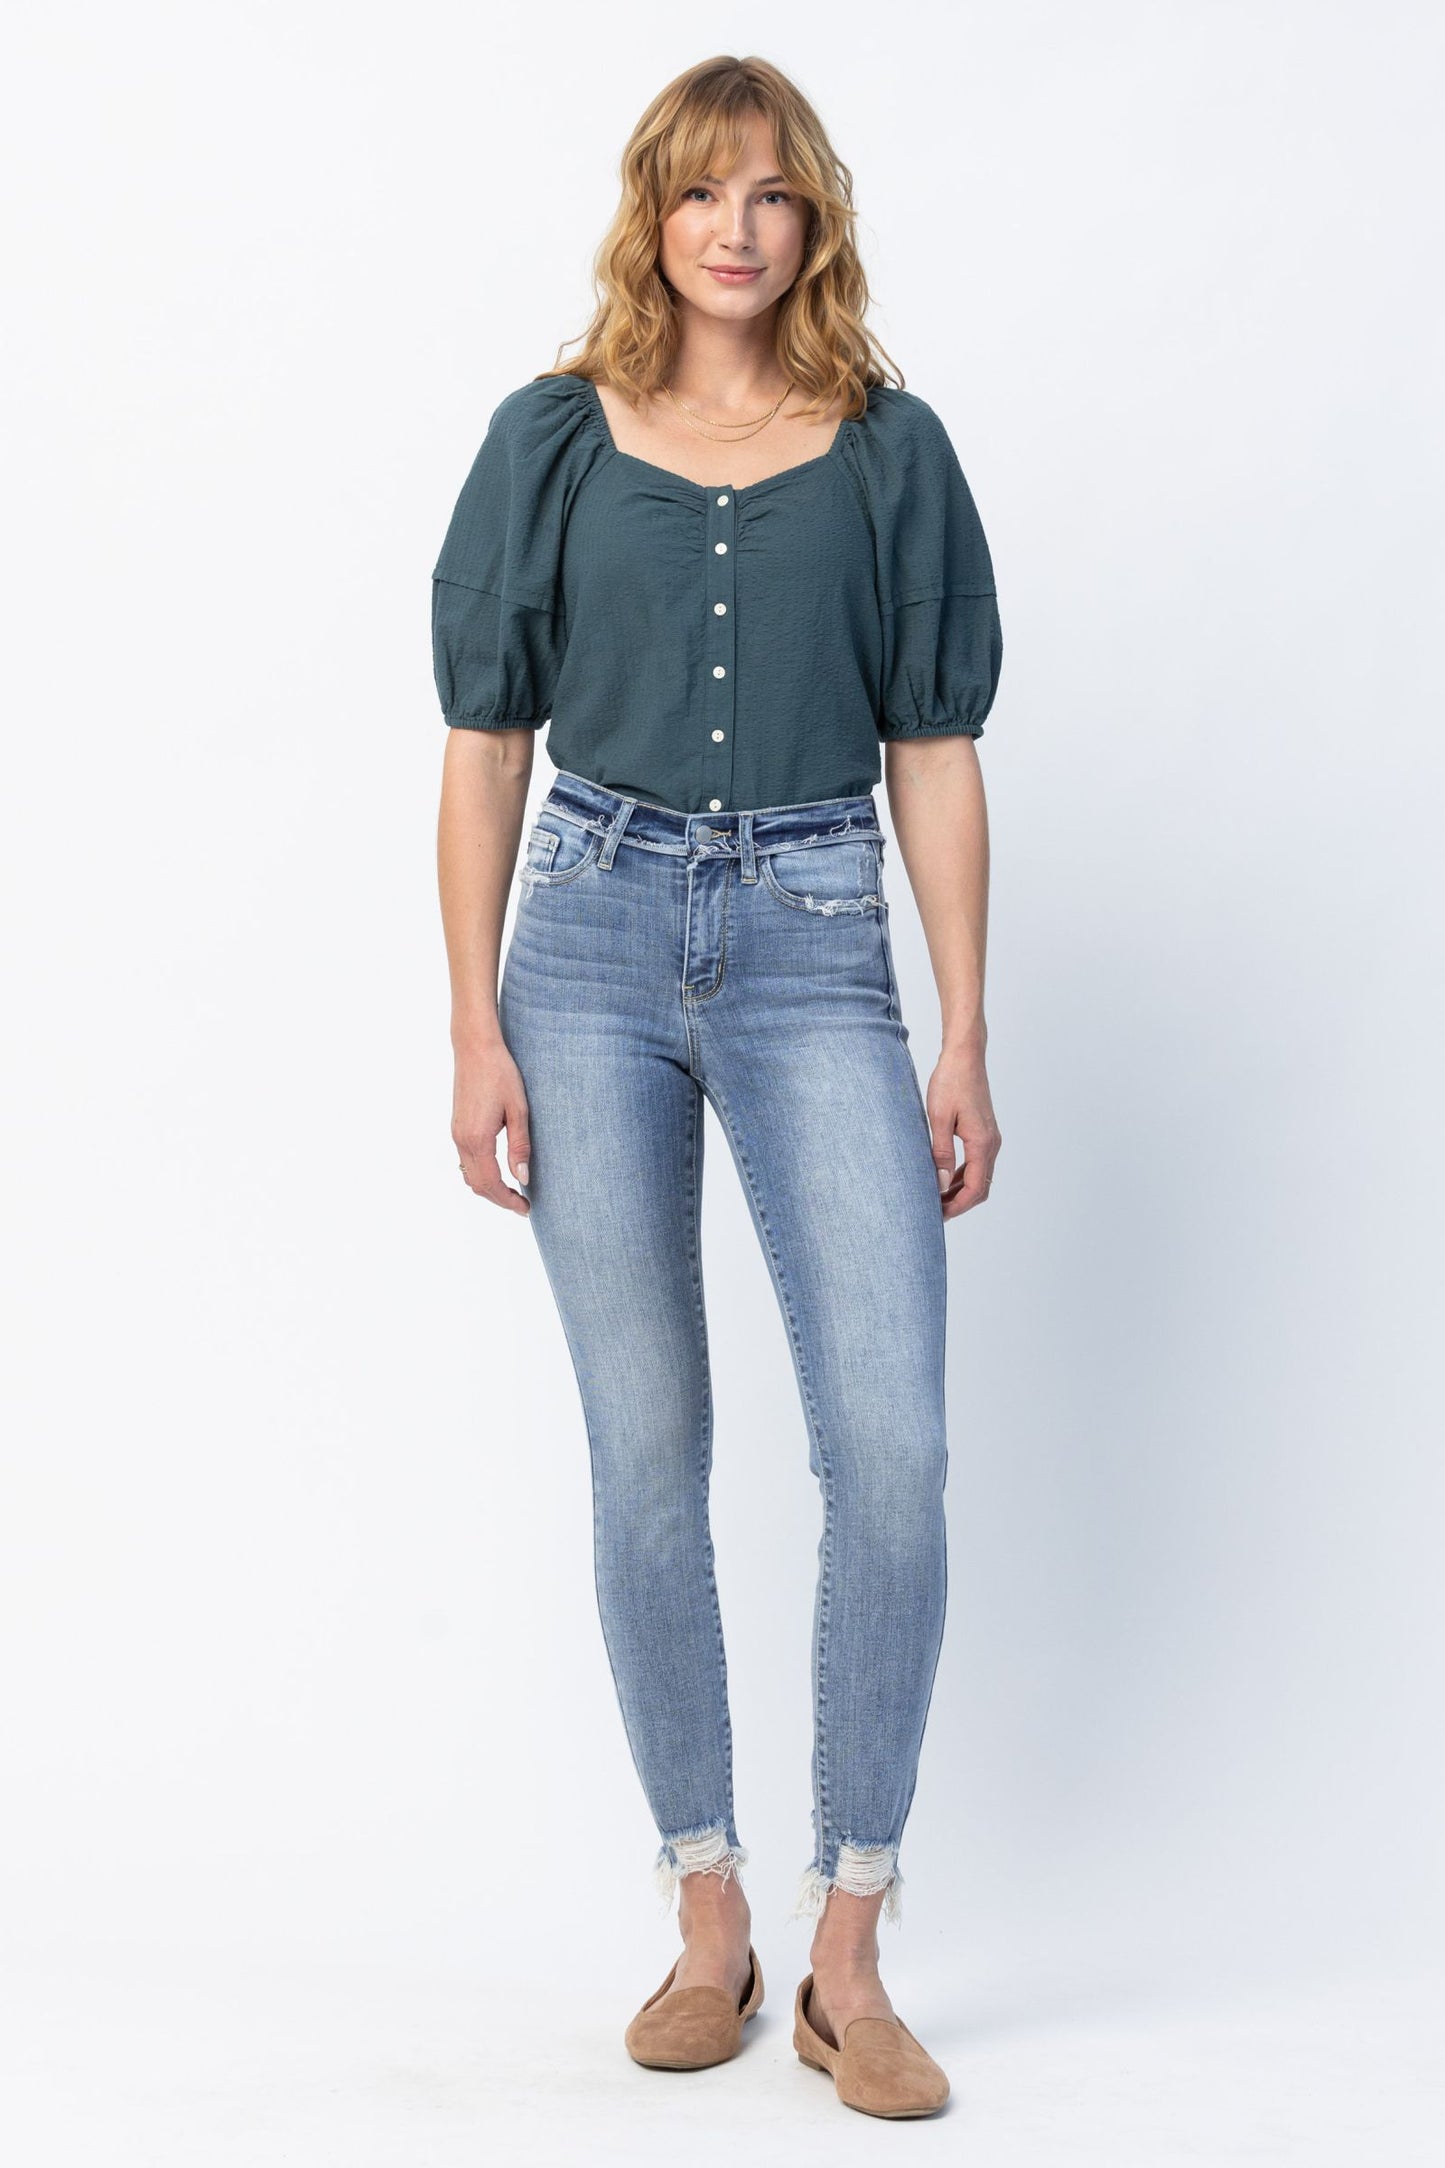 Judy Blue Jeans Mid rise